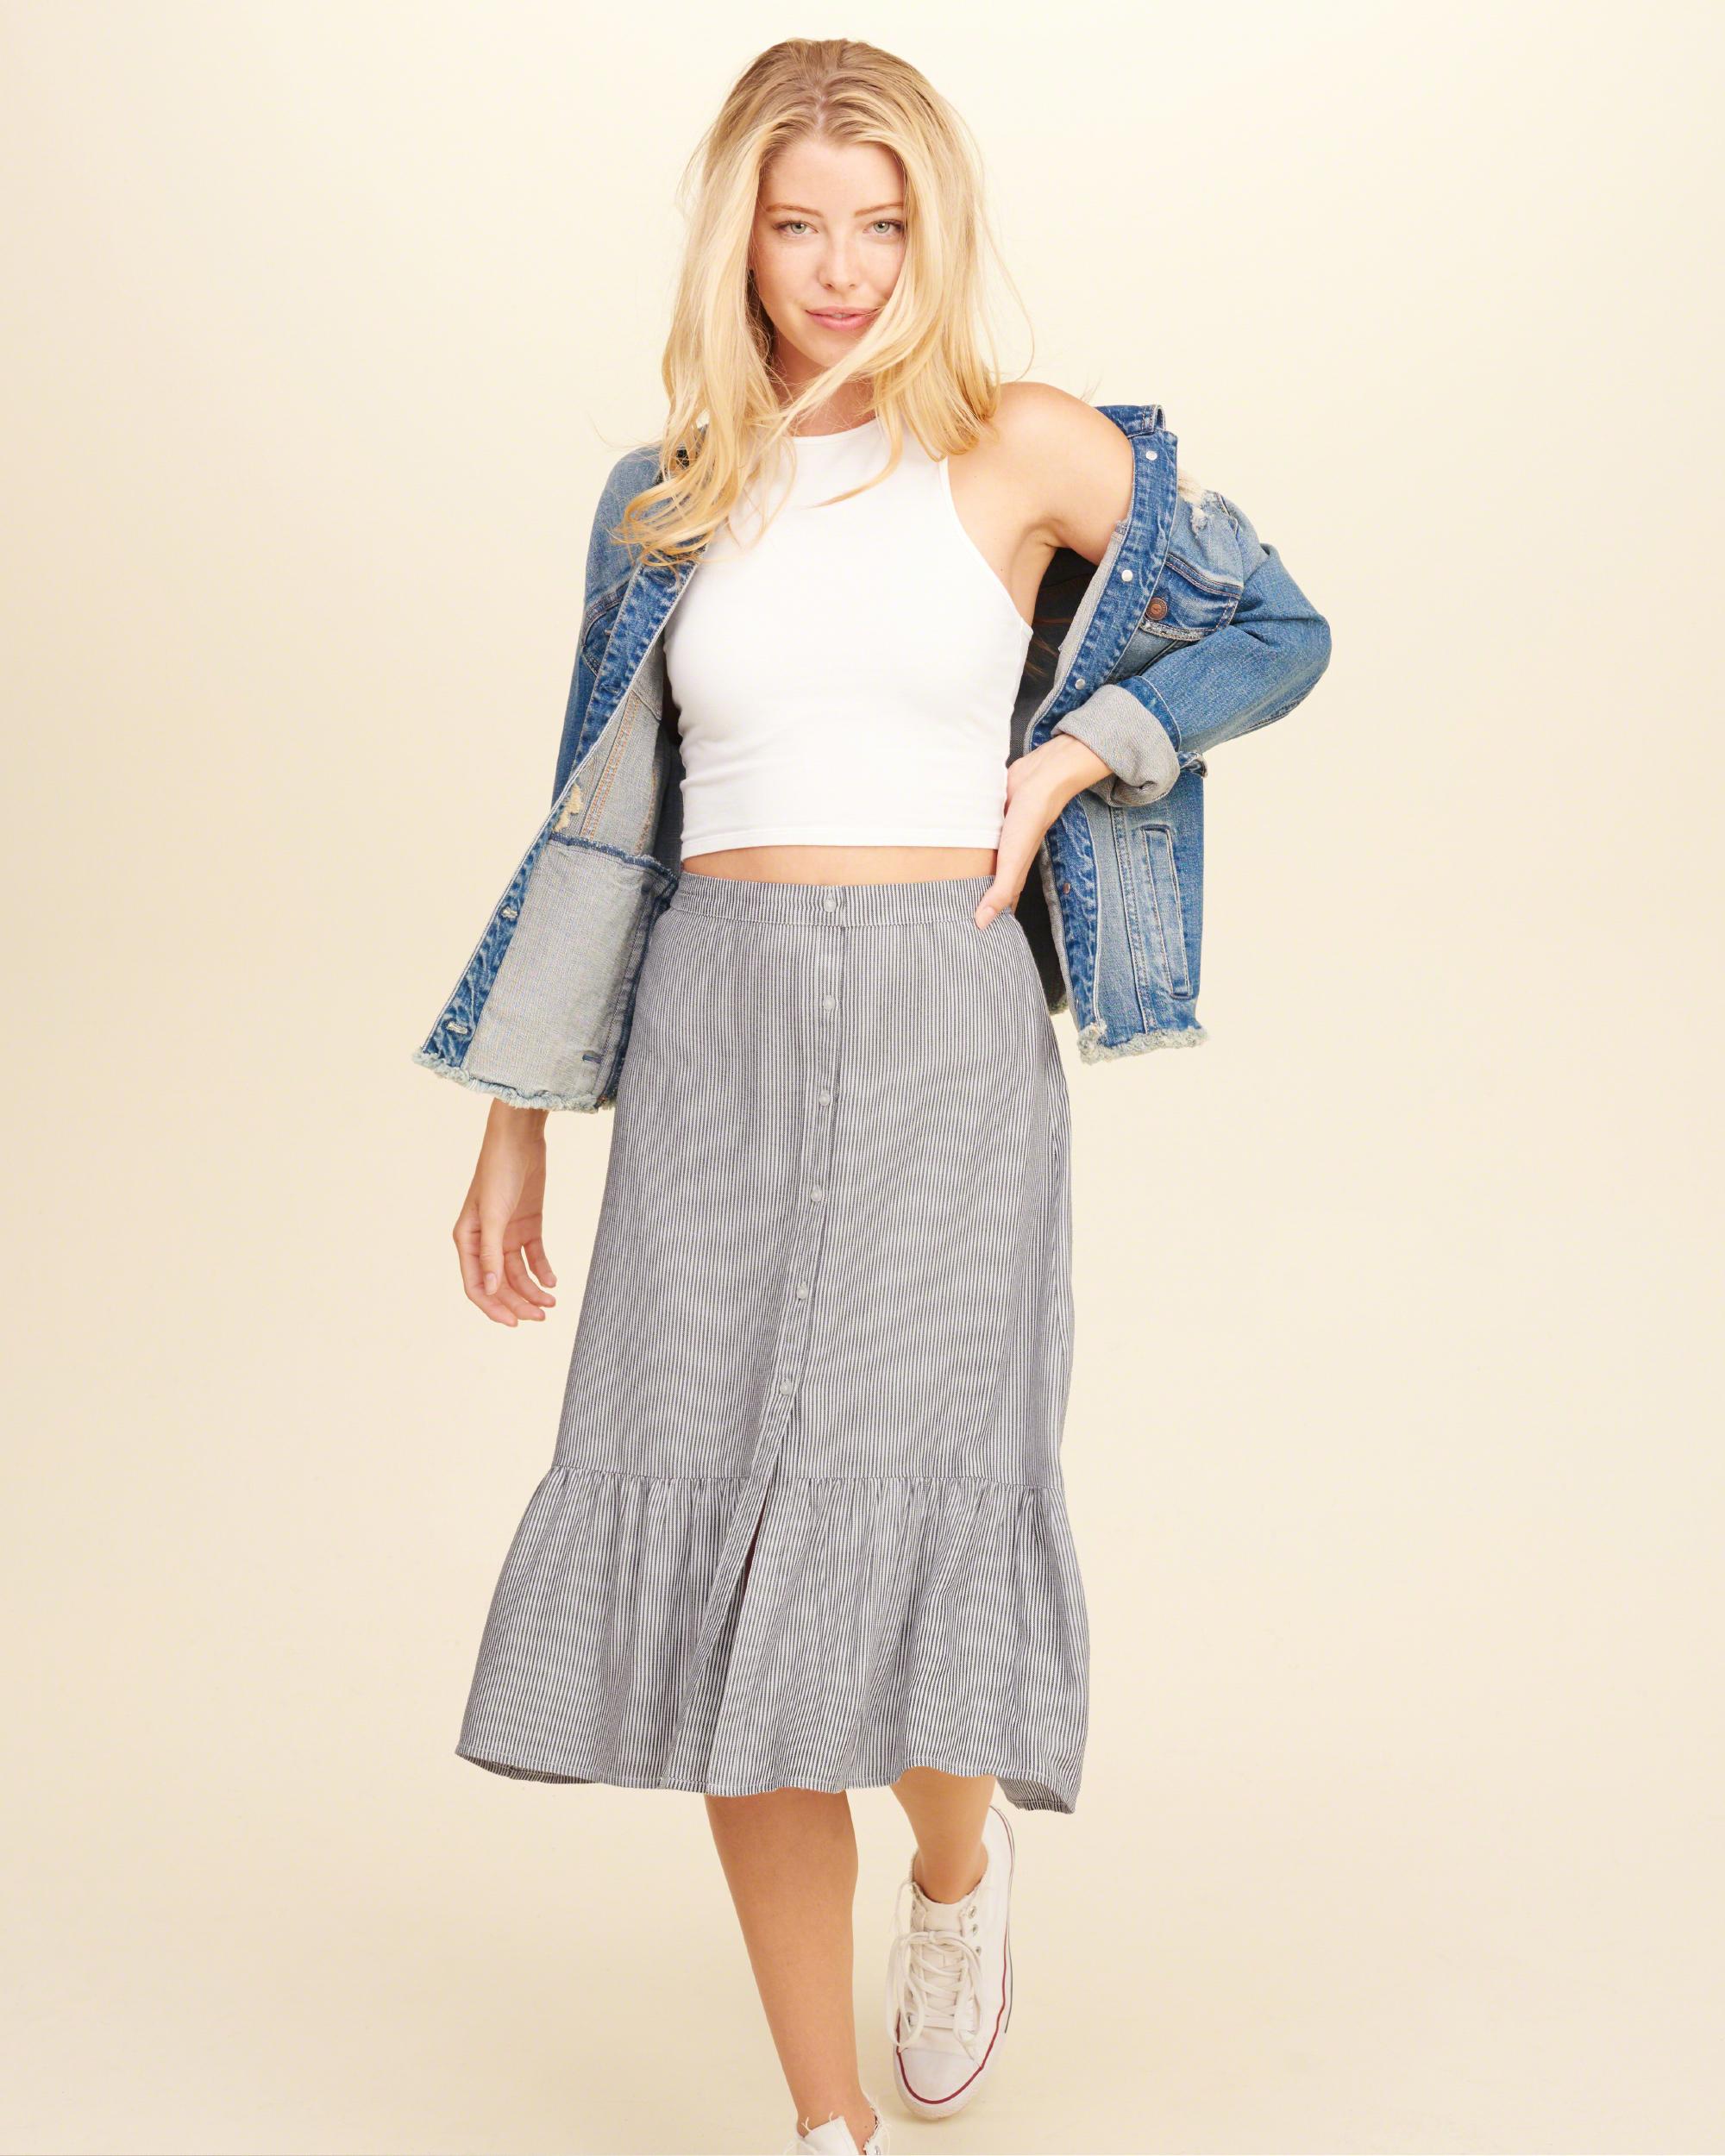 Lyst - Hollister Ruffle Button-front Midi Skirt in Gray